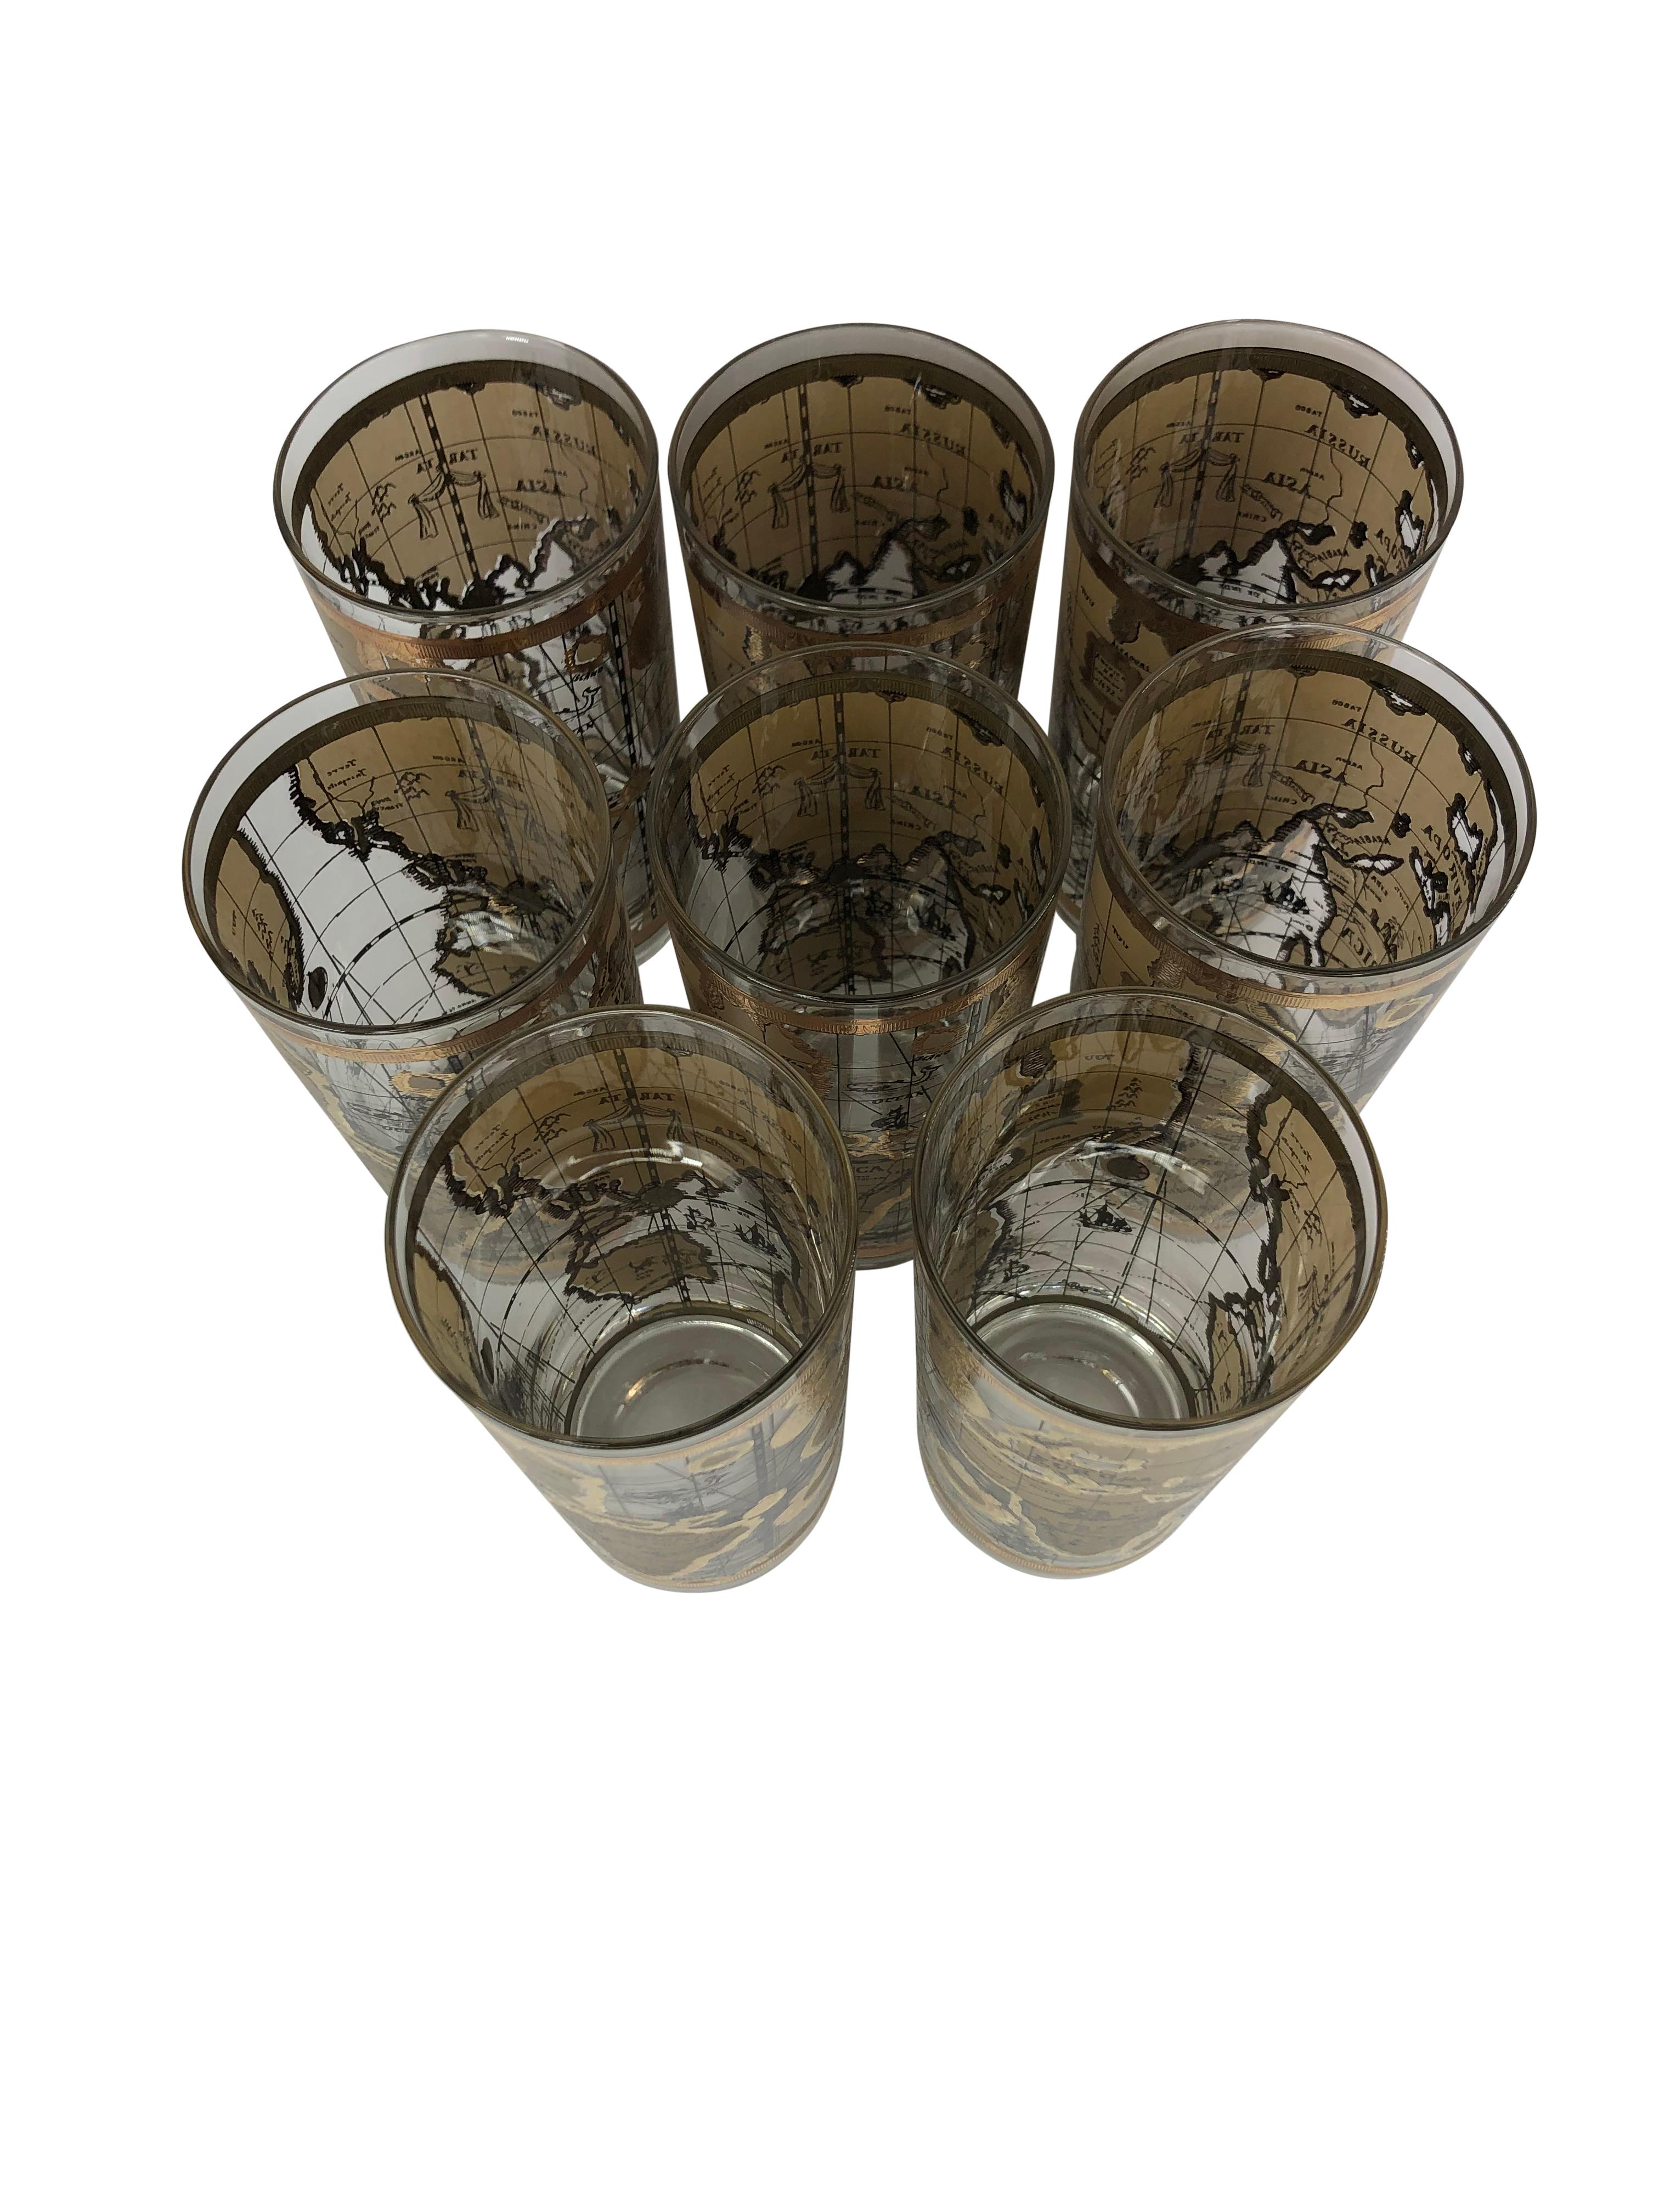 Late 20th Century Vintage Cera Glass Highball Glasses With Old World Maps - Set of 8 For Sale